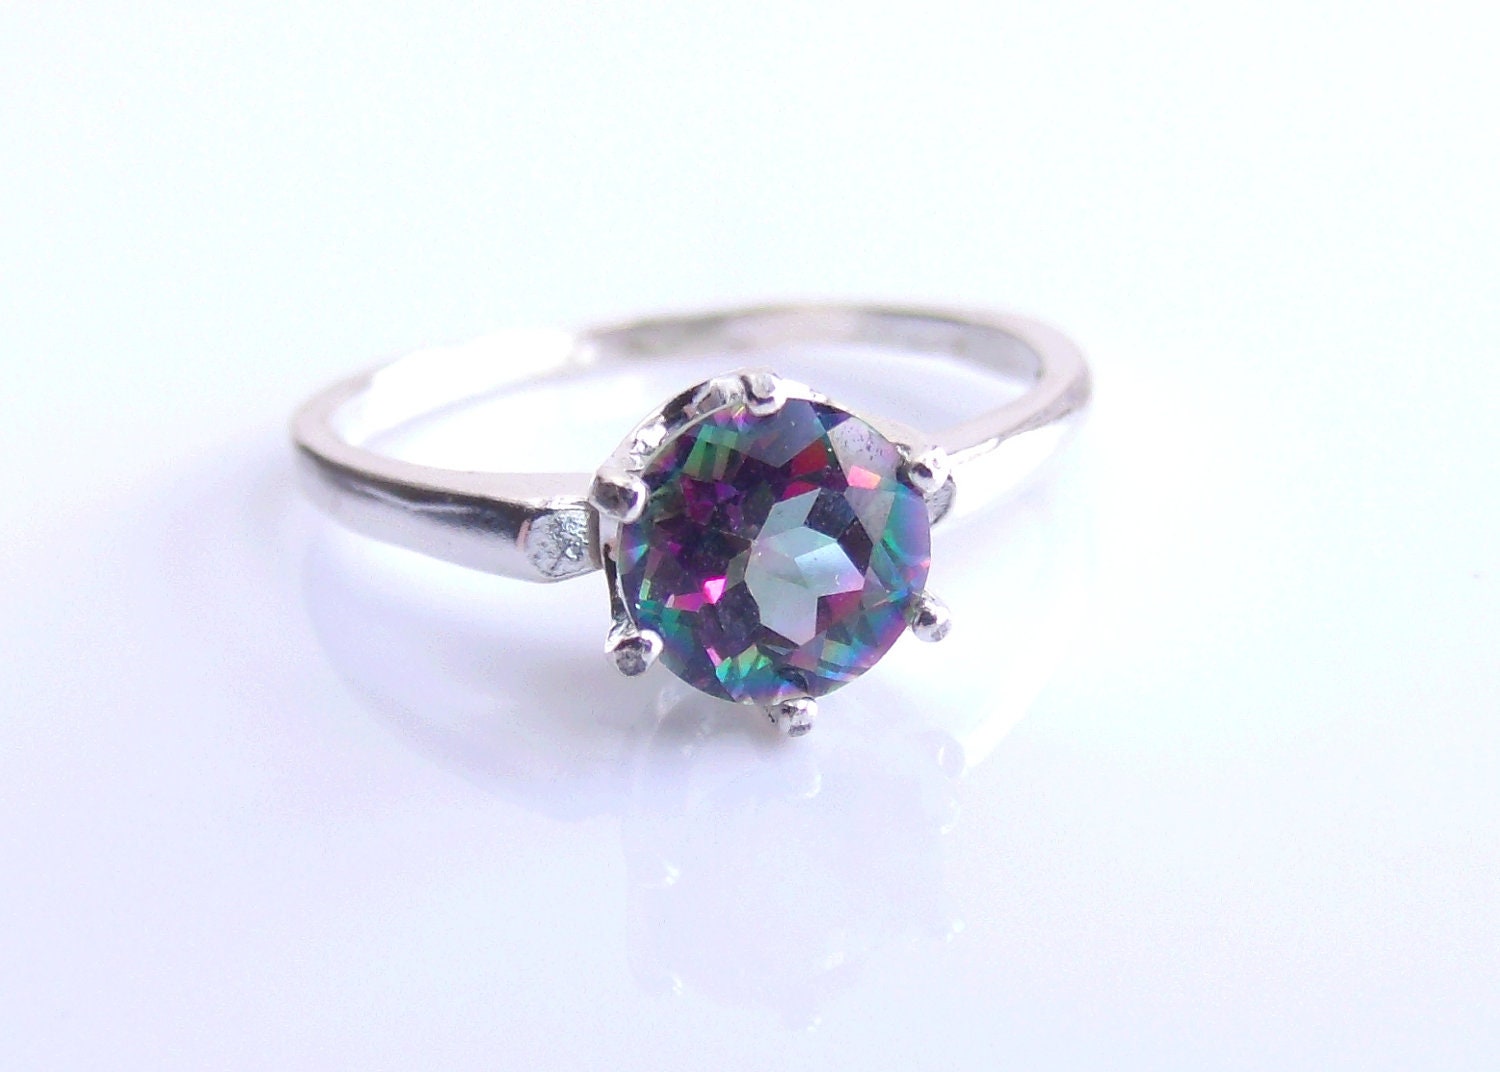 Mystic Topaz Rings on Mystic Topaz Ring Sterling Silver Ready To Ship By Katdesignsnyc